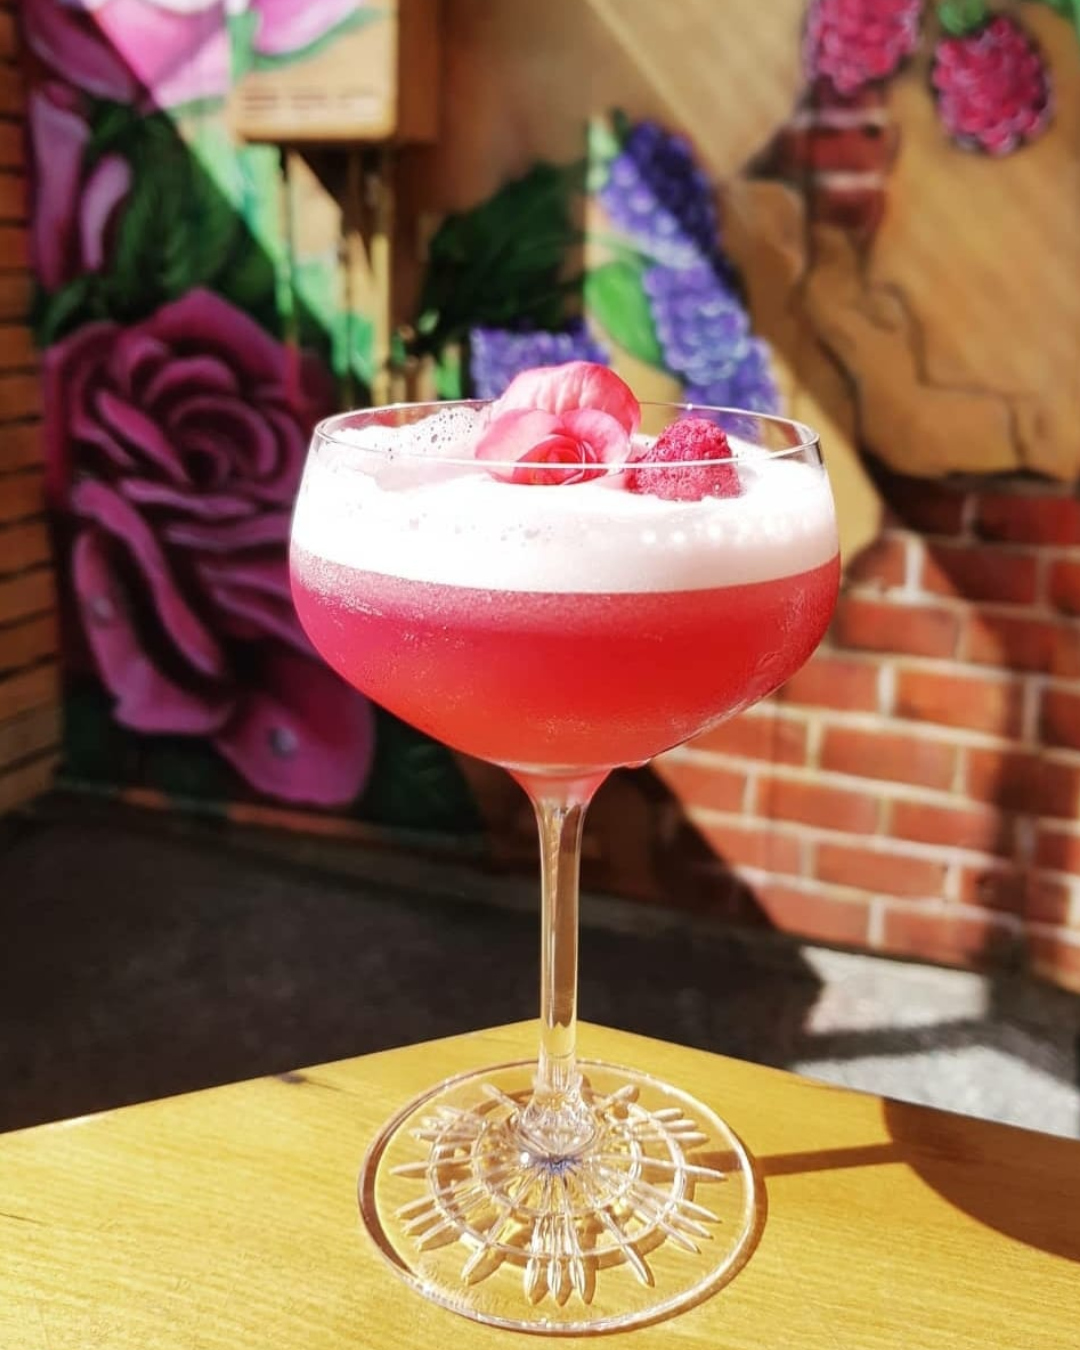 A delicious-looking, vibrant pink cocktail garnished with petals and berries sits on a table, ready to be sipped. 